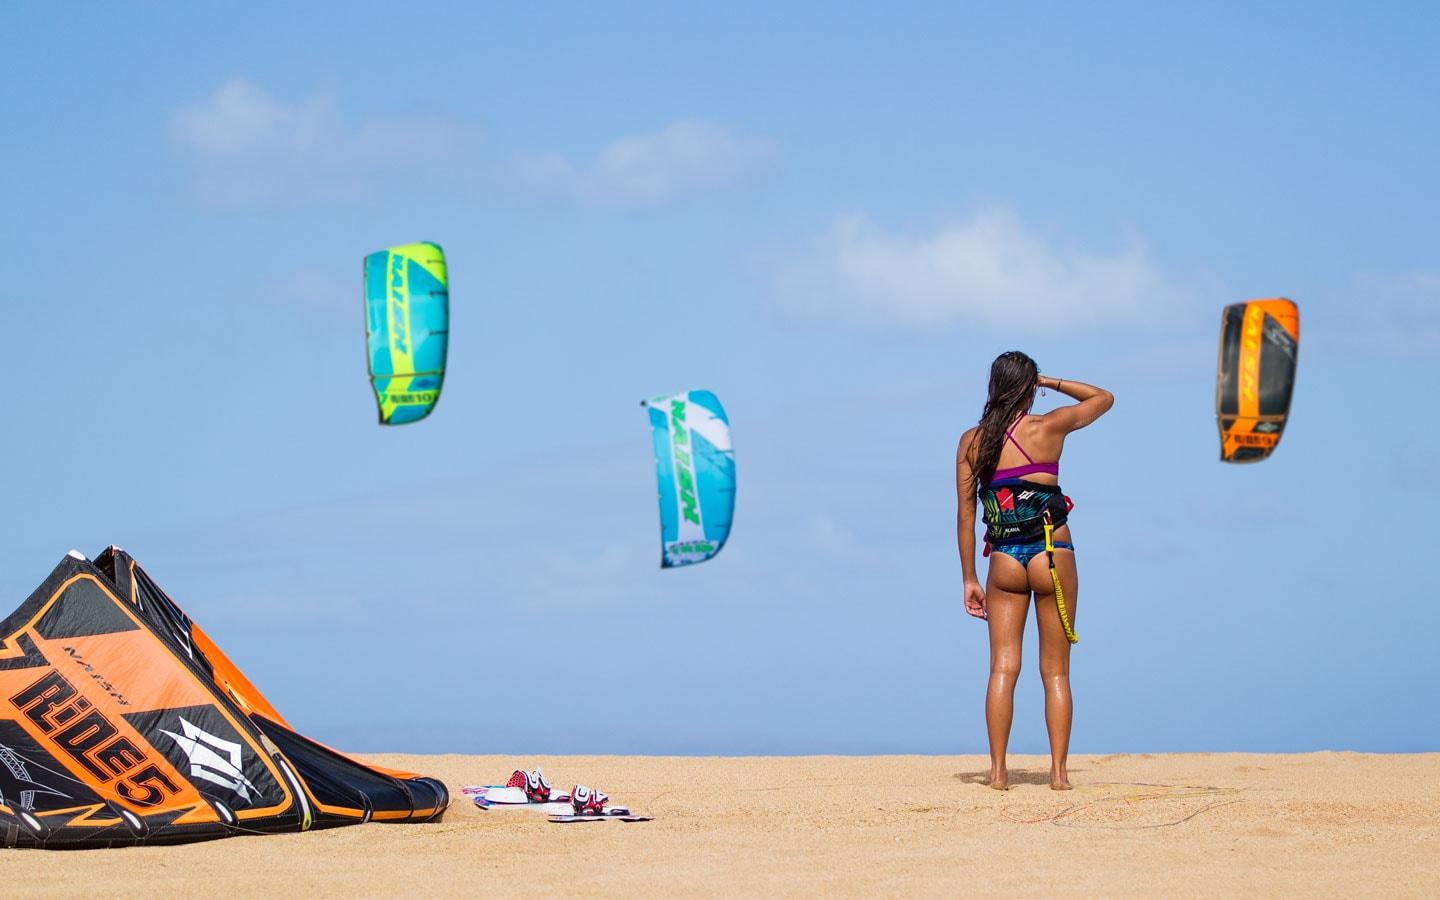 Reach New Heights with the 2016/17 Naish Kite Collection - Naish.com